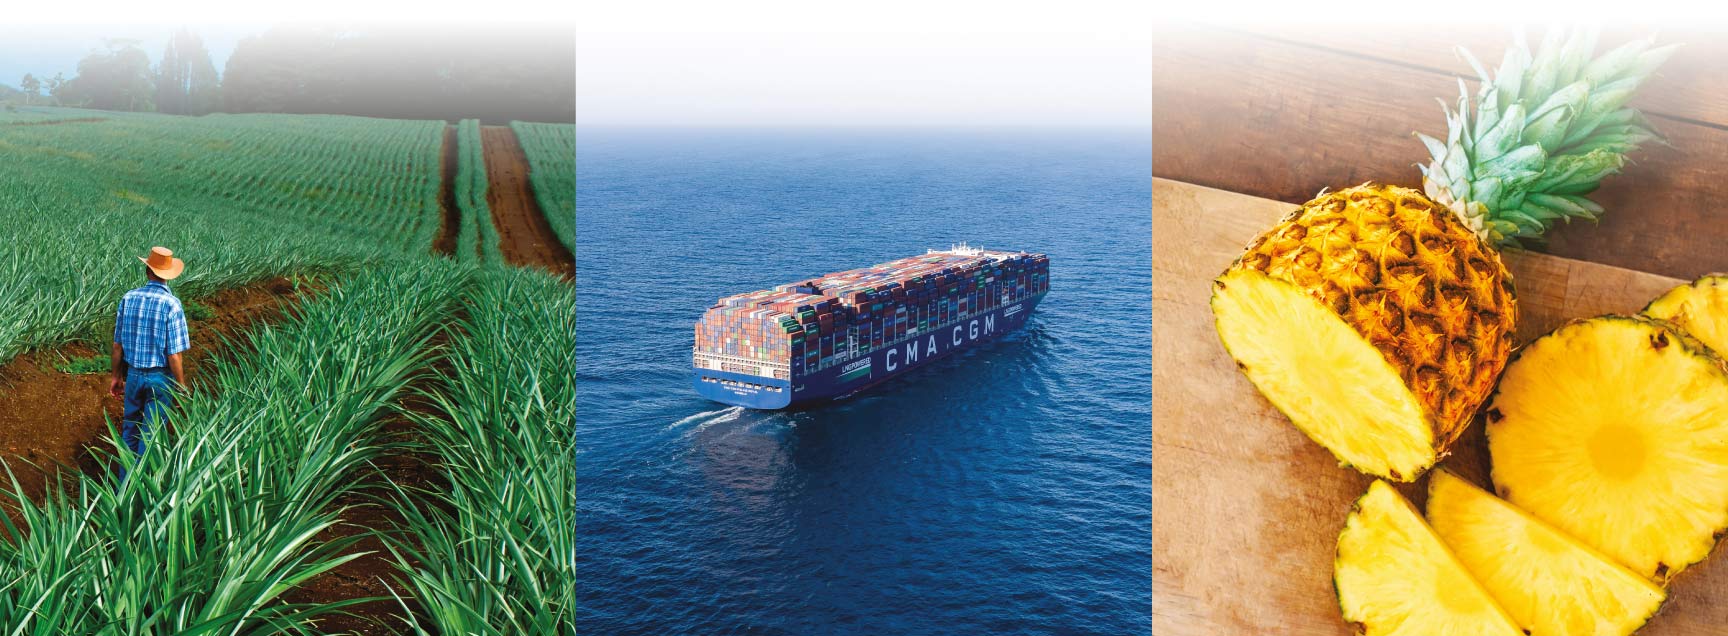 CMA CGM | A world leader in maritime and logistics